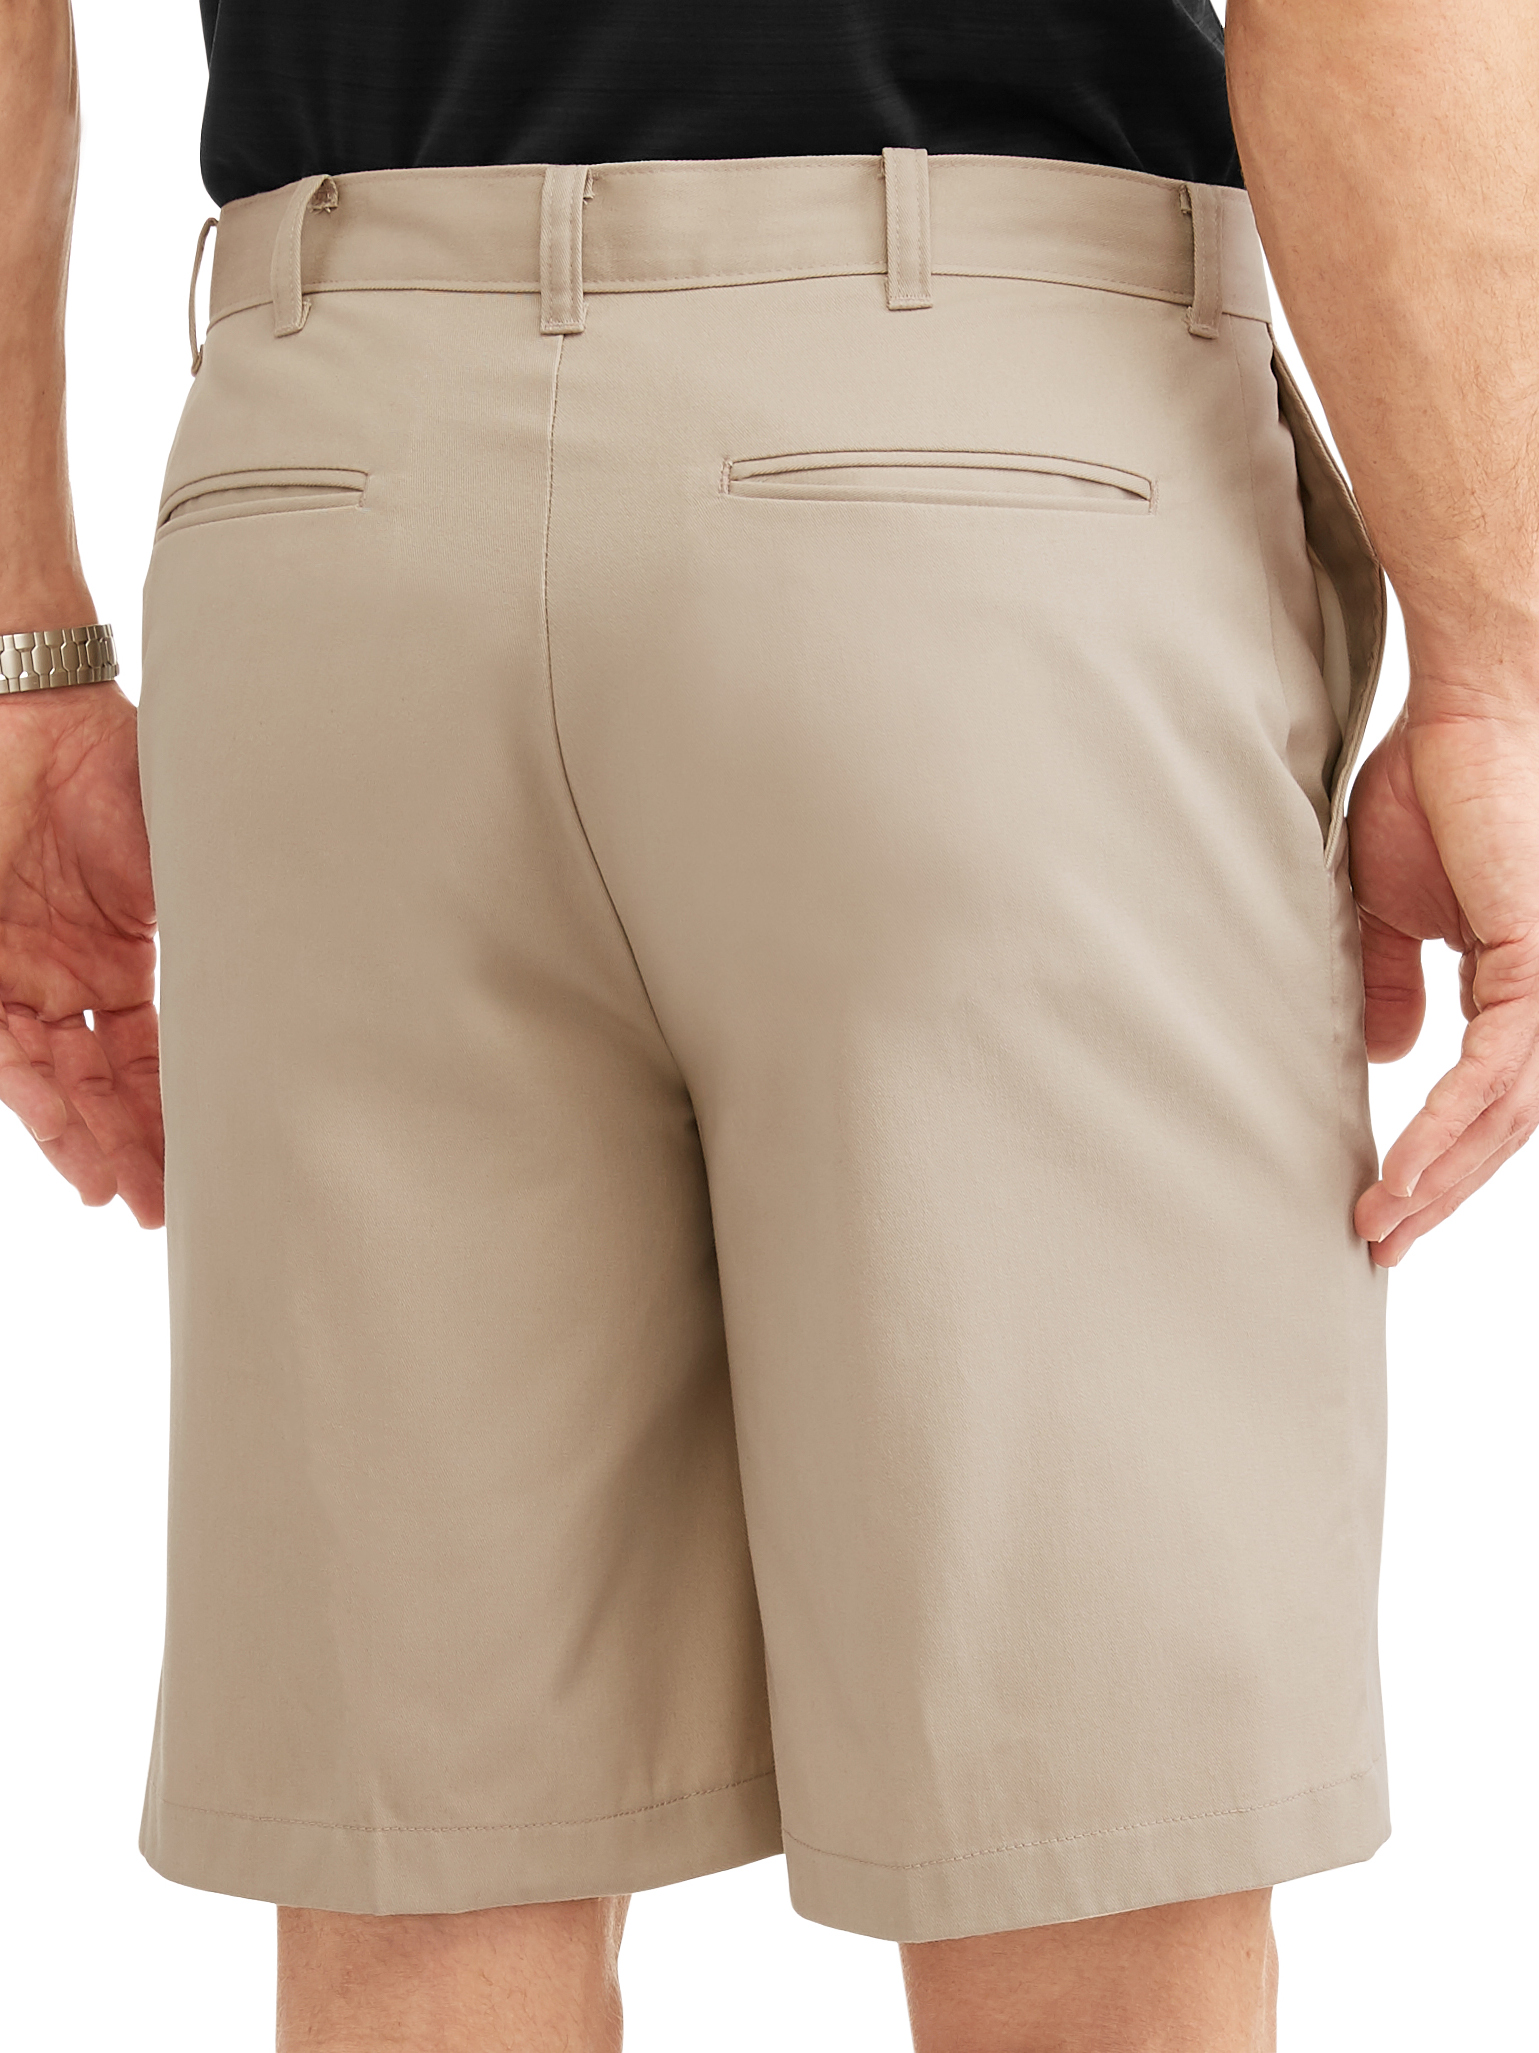 George Men's 9.5" Twill Flat Front Shorts - image 3 of 3